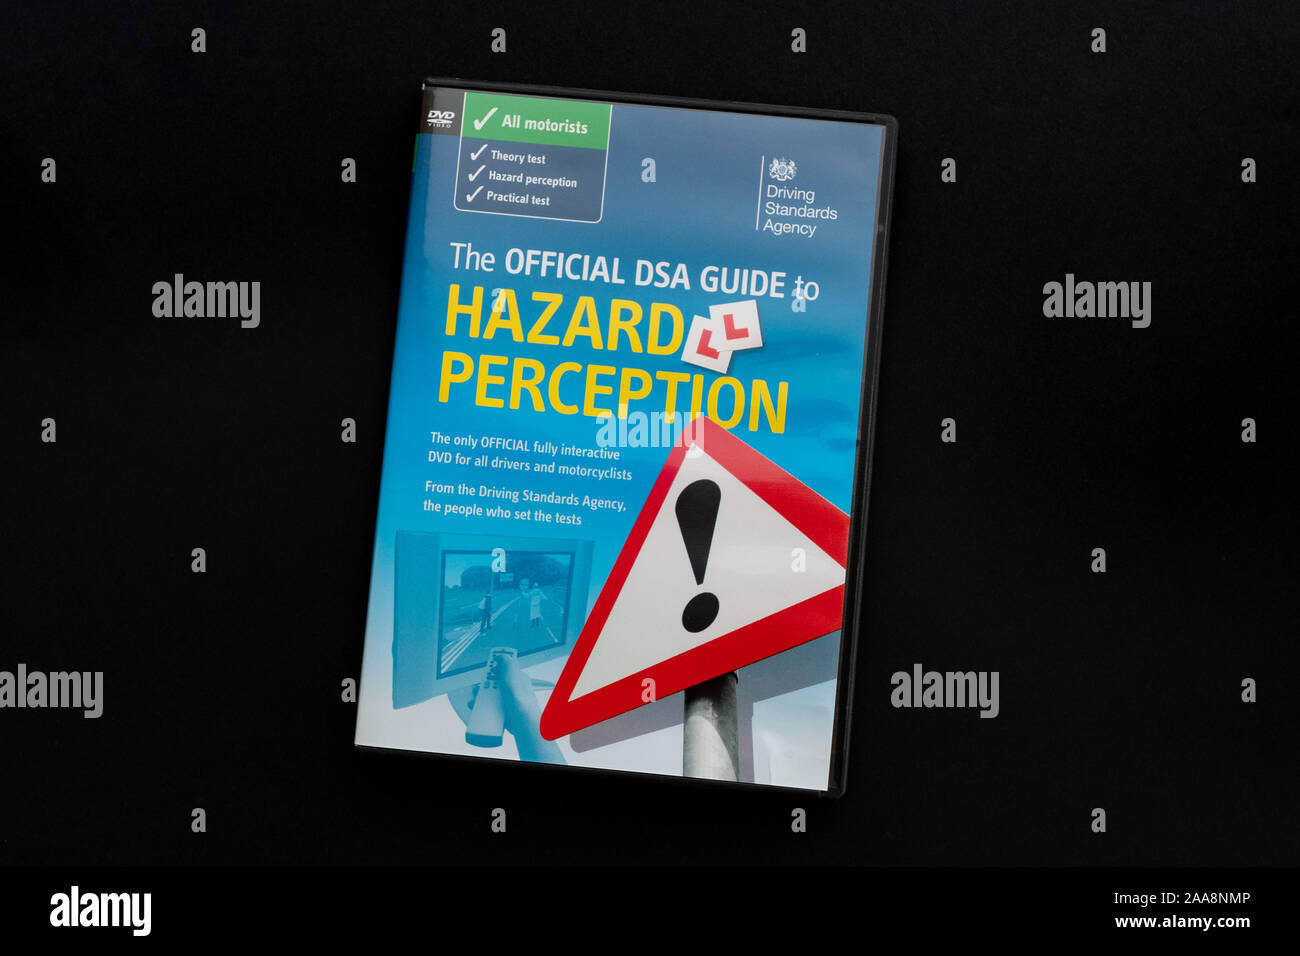 Hazard Perception driving test practice dvd by the Driving Standards Agency, UK Stock Photo